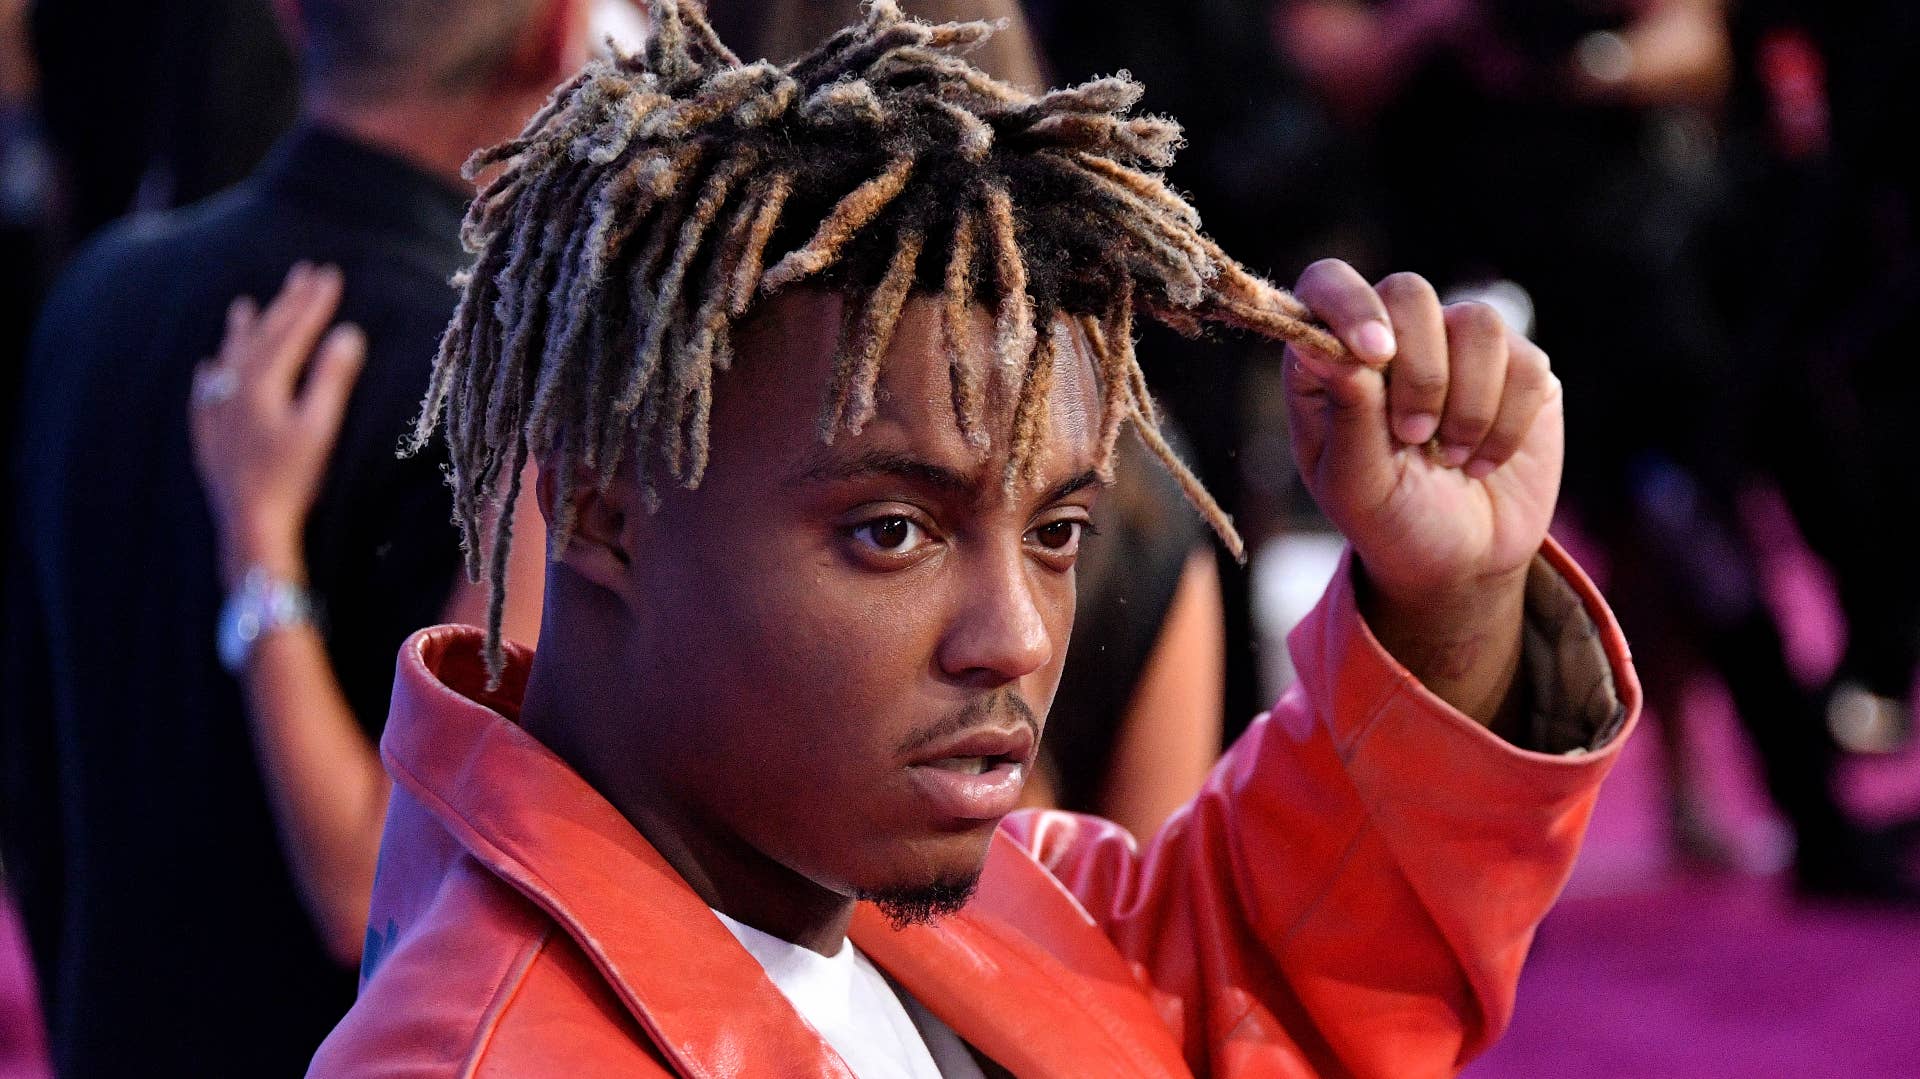 Juice Wrld photographed at the 2018 MTV Video Music Awards.